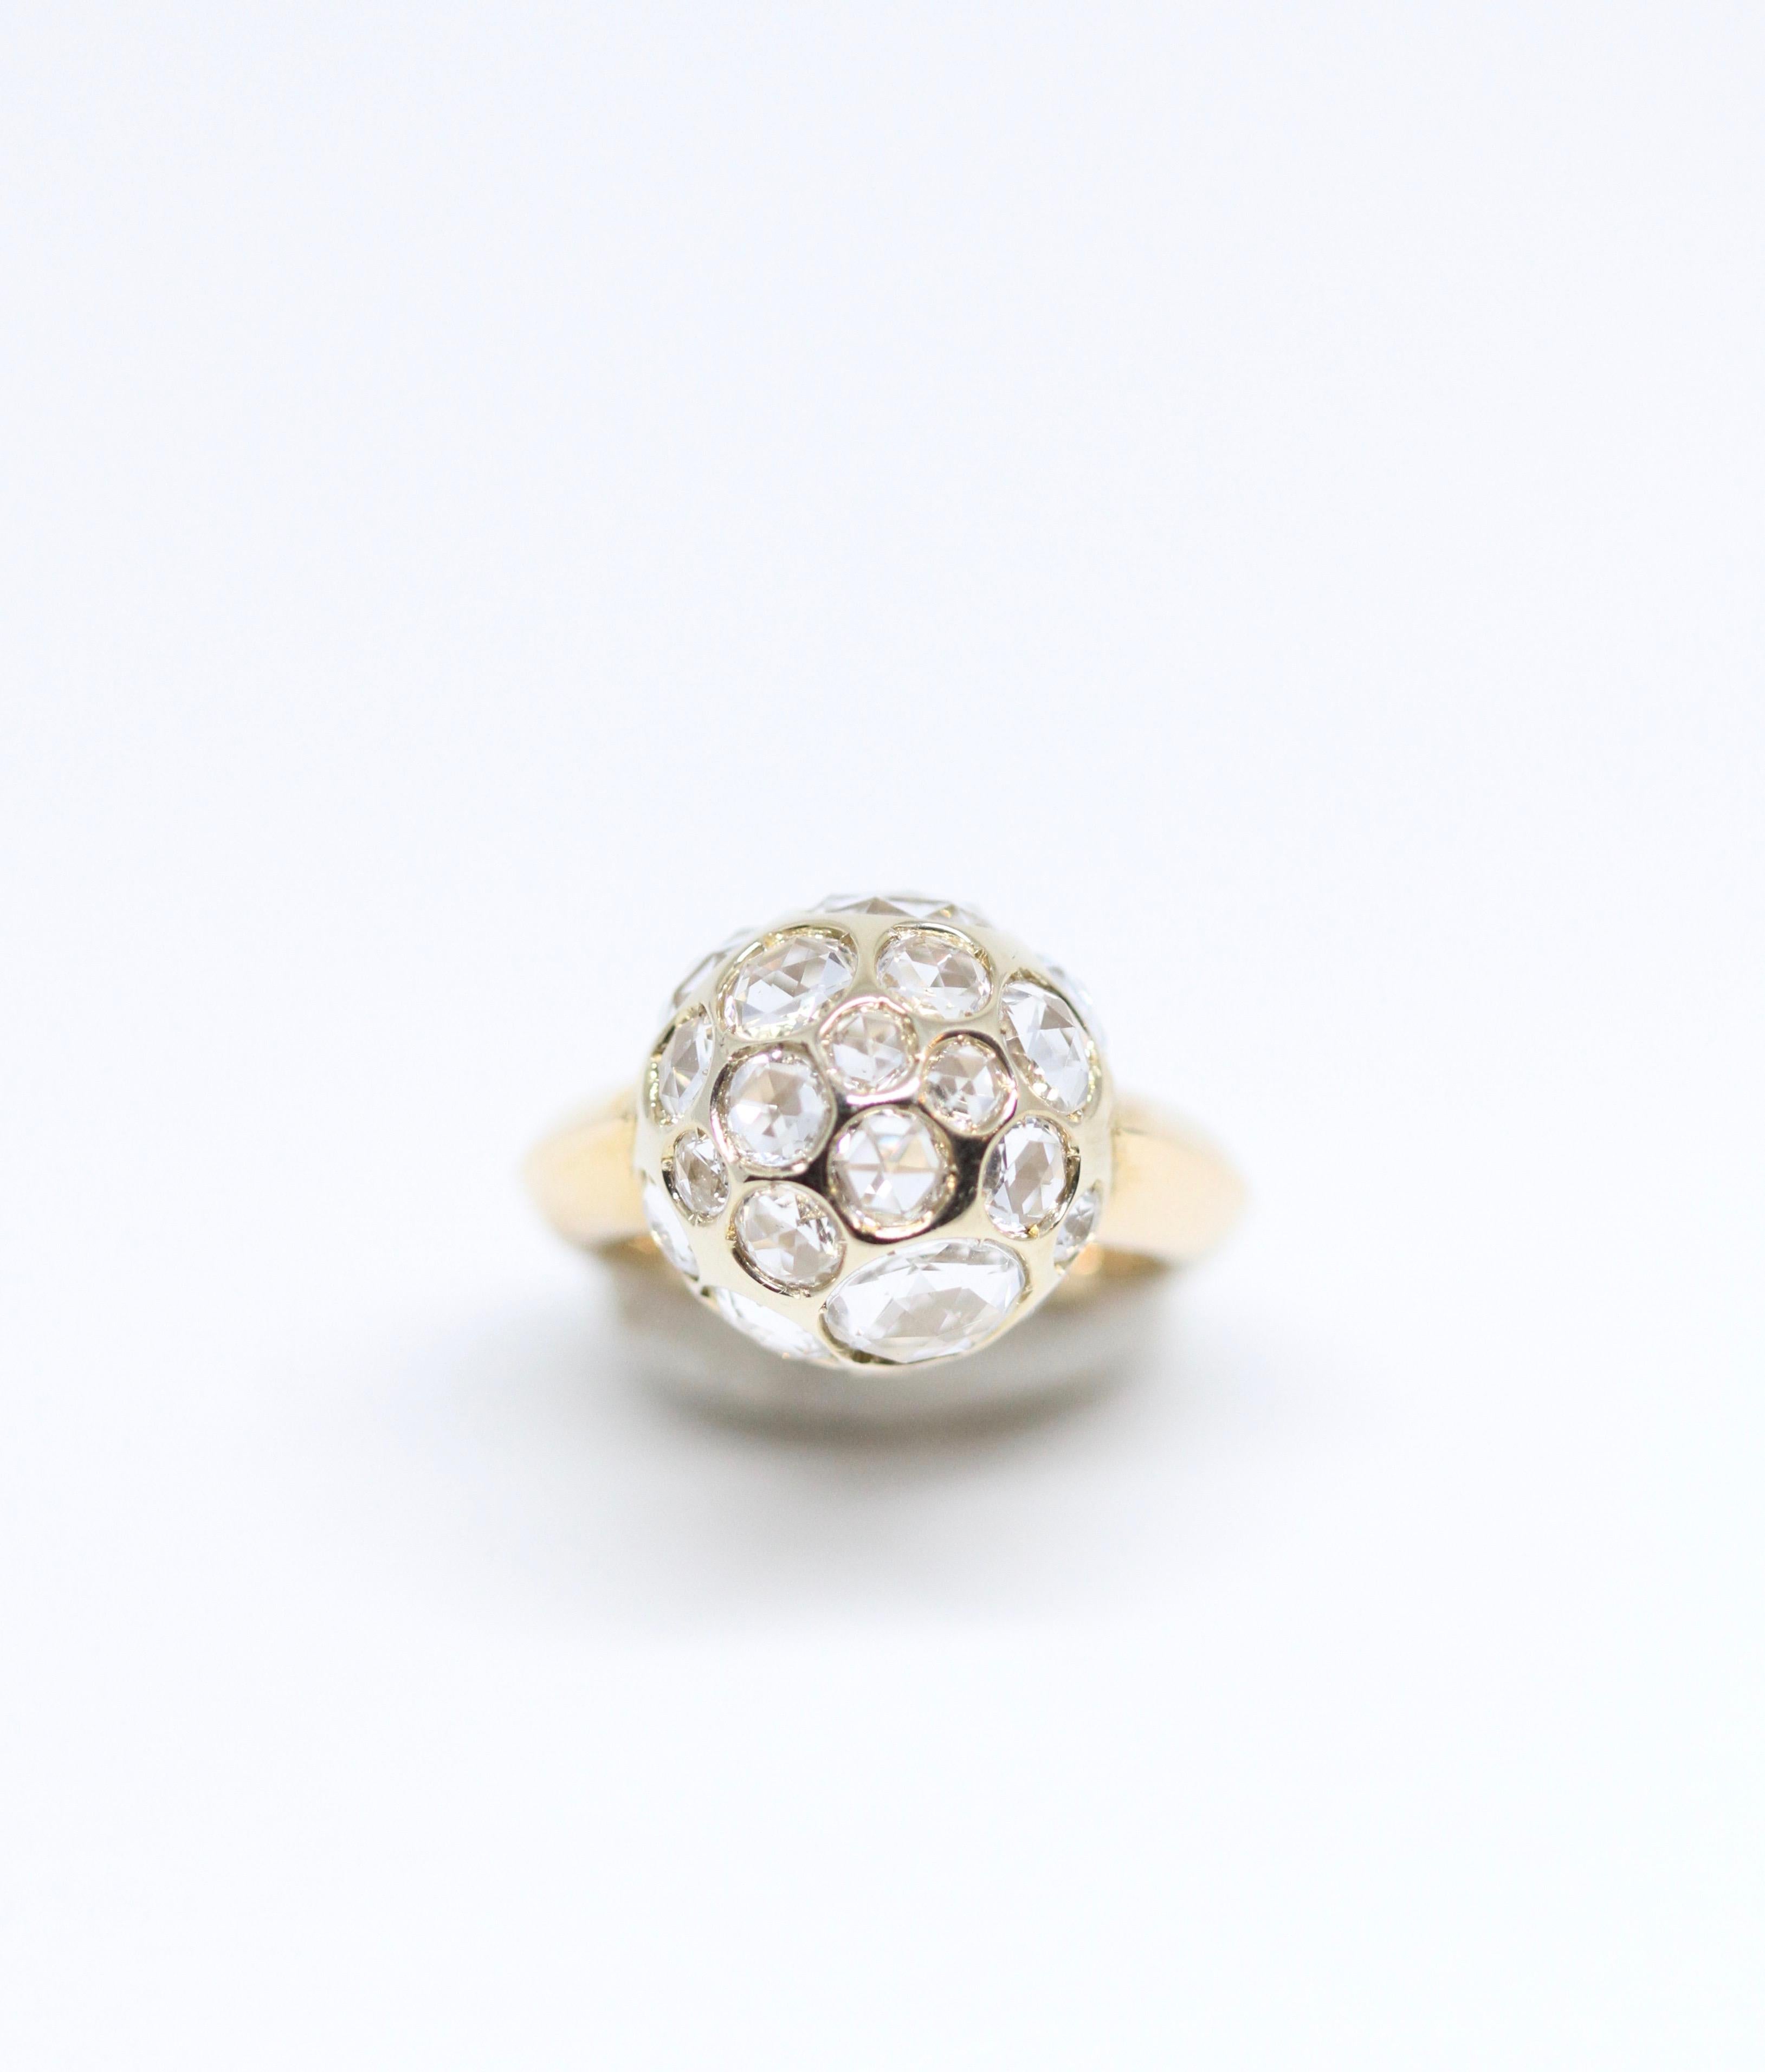 This ring features a bead-shaped centre inset with rose-cut crystal of various sizes.

Material: Yellow gold and White Rock Crystal 
Condition: Very good
Size: 50

All items at la Bourse du Luxe are subject to a strict quality control.